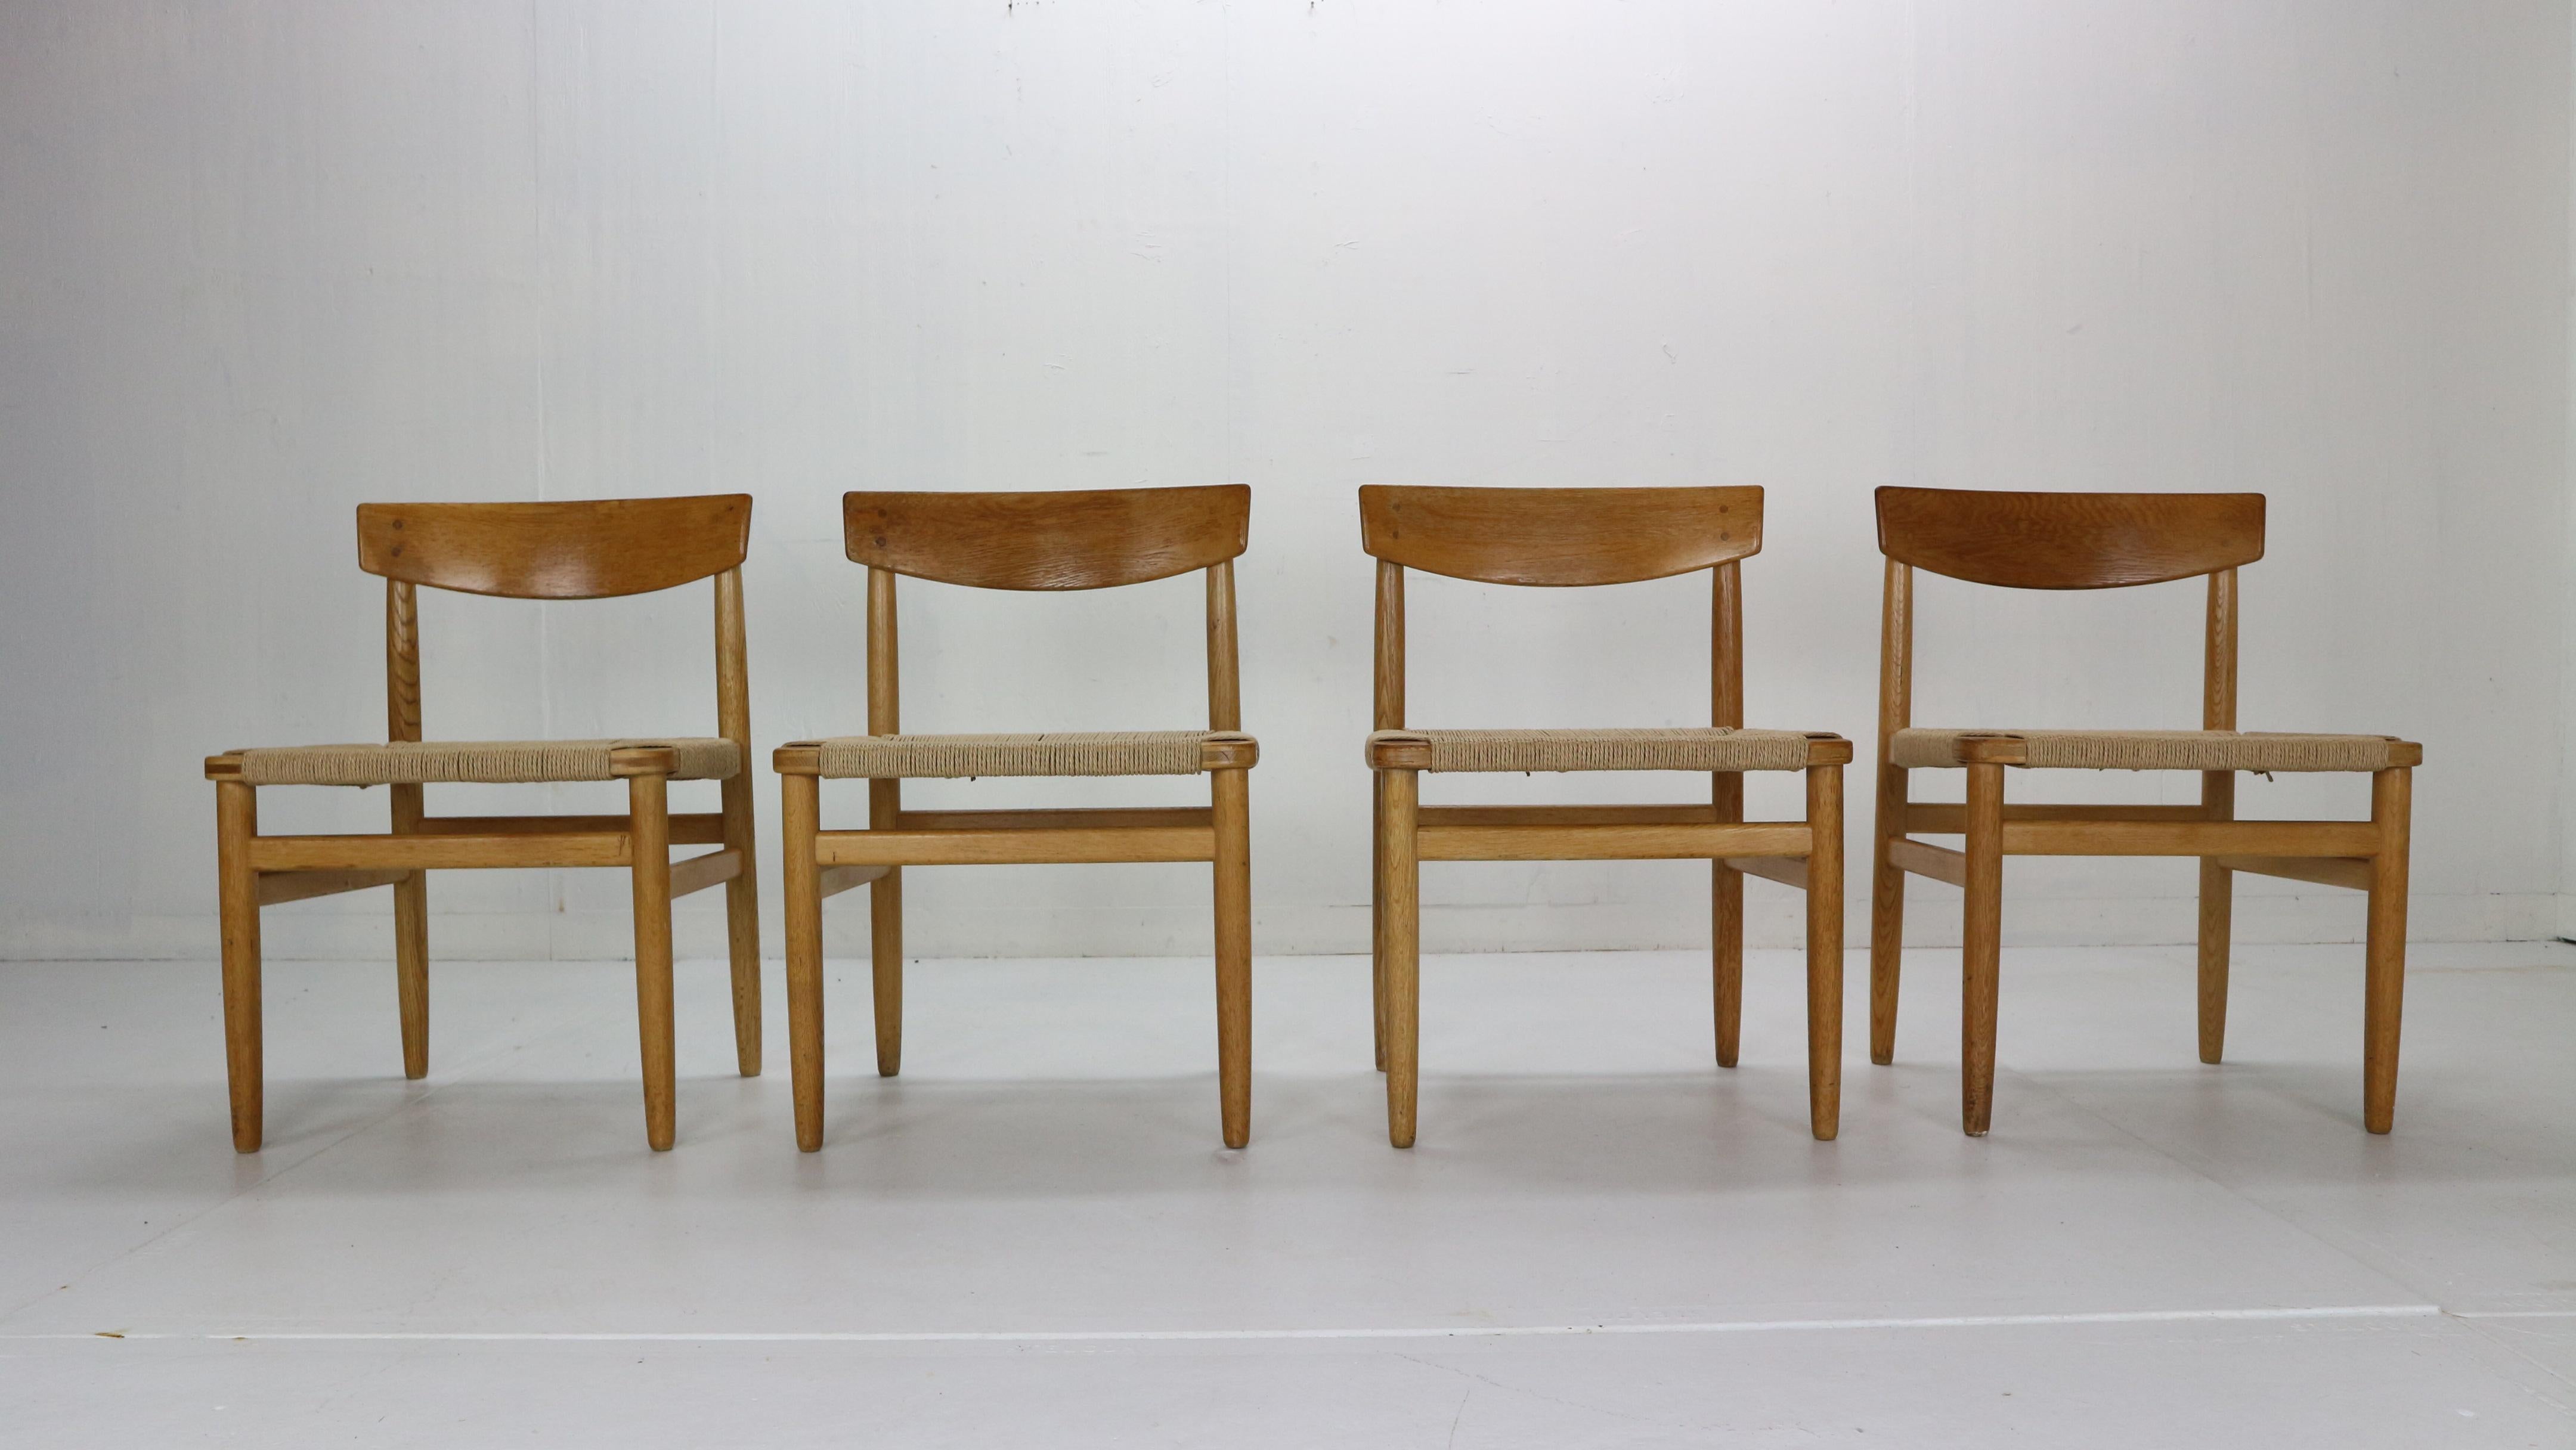 Scandinavian Modern period set of 4 dining room chairs designed by Børge Mogensen for the Øresund series, 1950s. Produced by Karl Andersson & Söner in Sweden.
Model no.- 537. The design was inspired by the American Shaker furniture. 

Solid oak